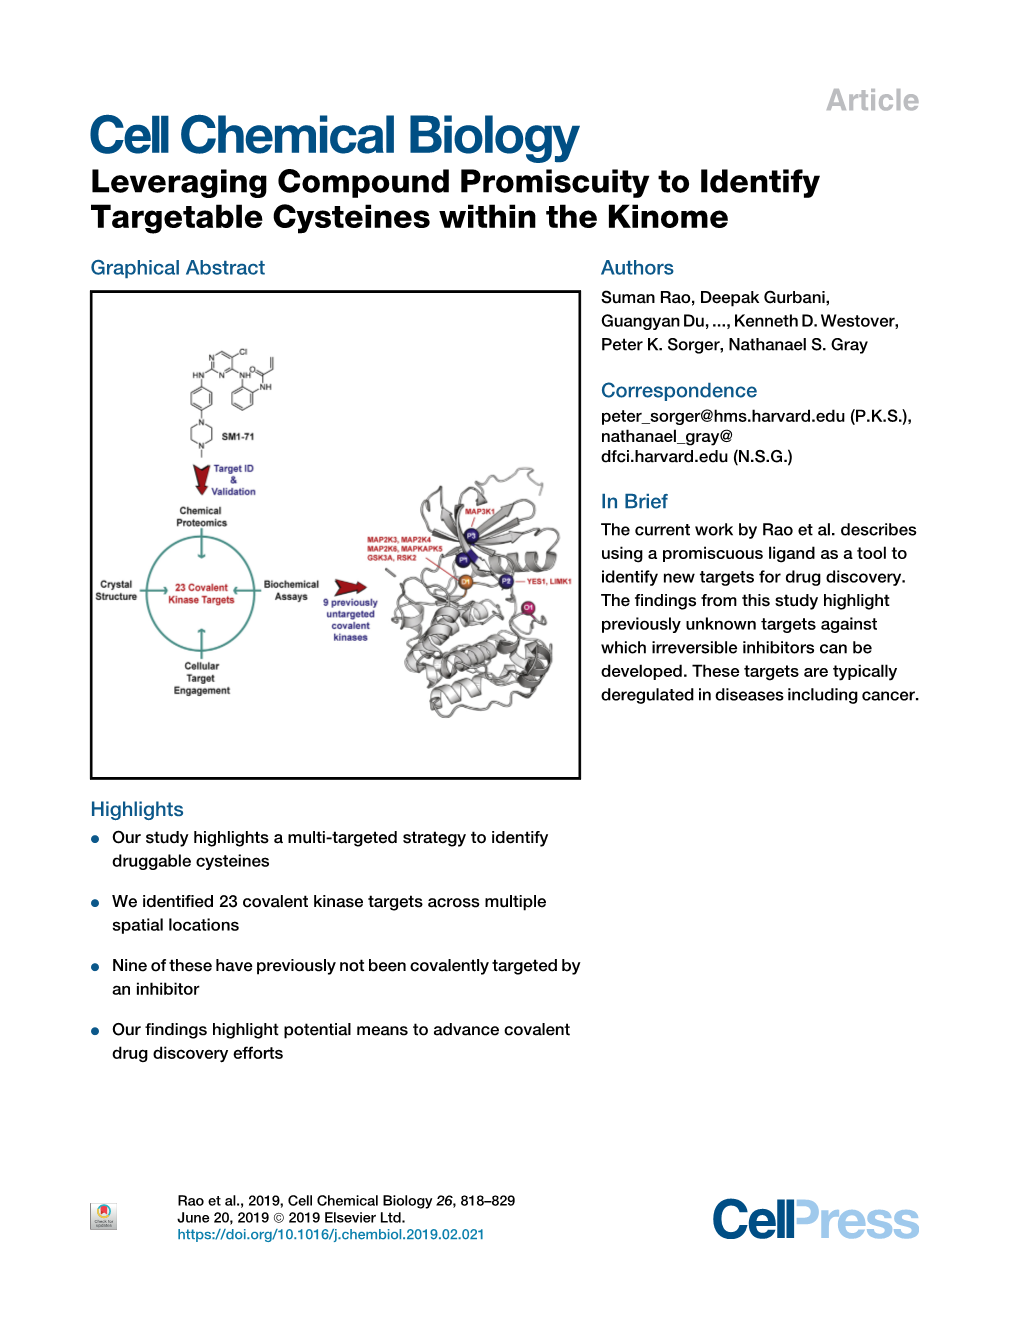 Leveraging Compound Promiscuity to Identify Targetable Cysteines Within the Kinome